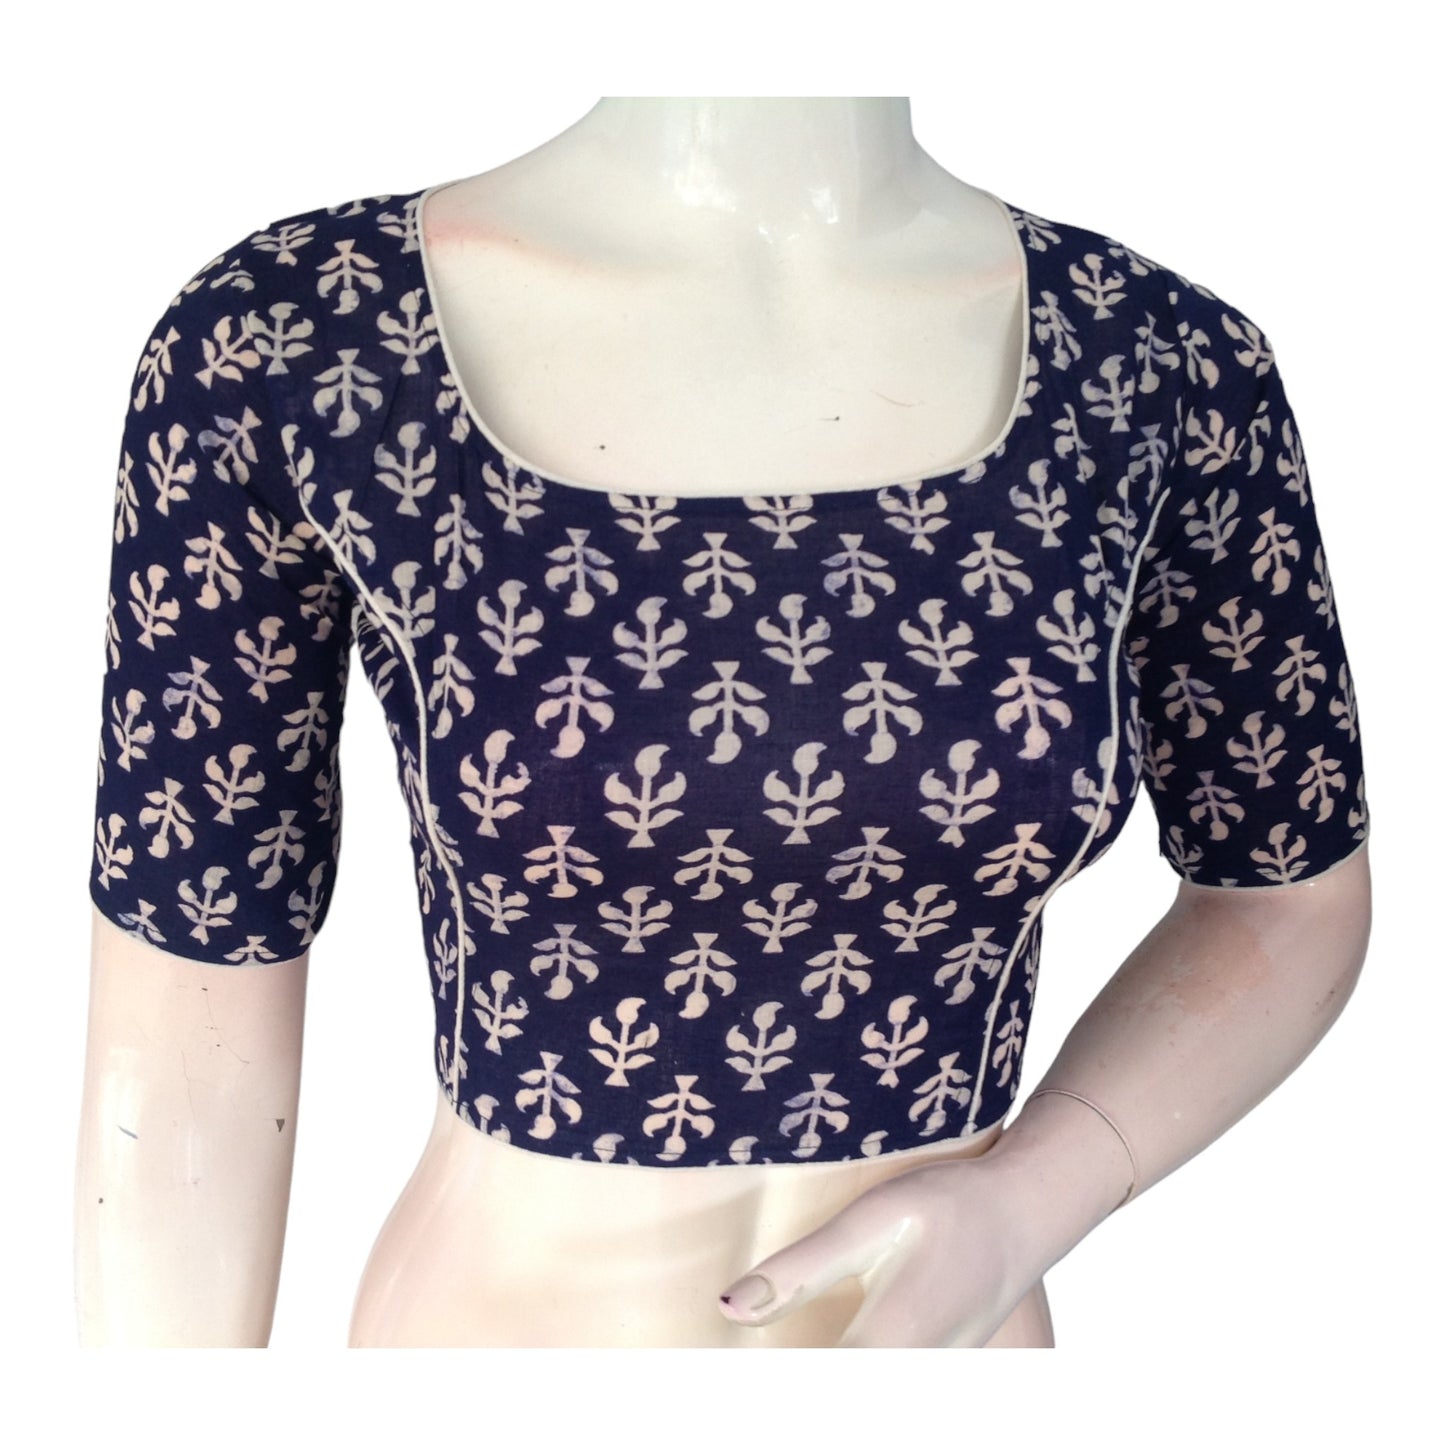 Navy Blue High Neck Saree Blouse | Cotton Elegance | Ready-to-Wear | Made in India